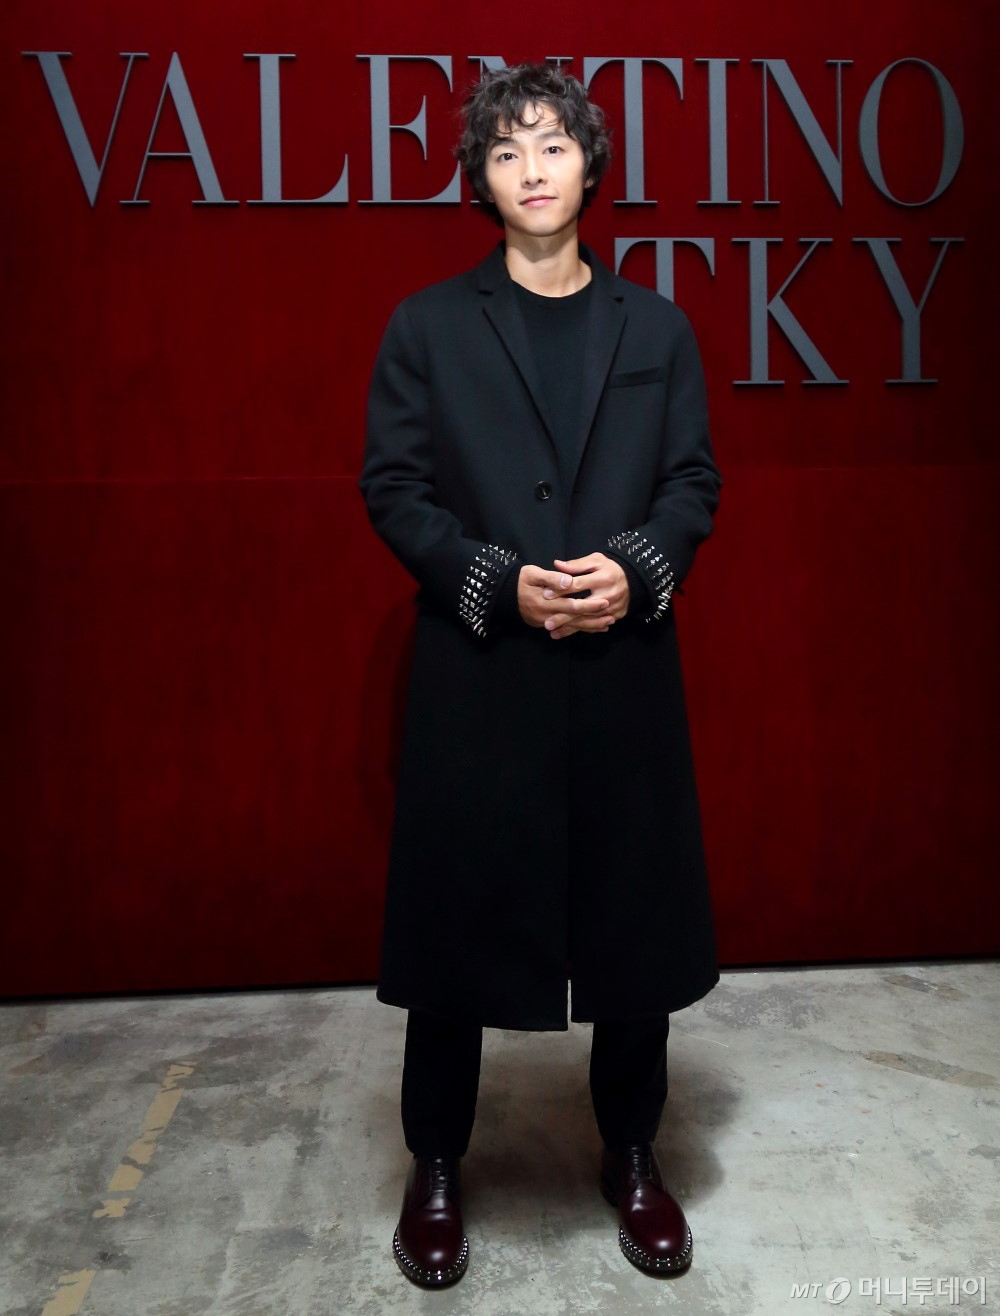 Actor Song Joong-kis current status has been revealed.Song Joong-ki attended the Valentino SpA Pretaporte 2019 Freefall Collection in Tokyo, Japan on the 27th.On the day, Song Joong-ki produced a funky style look in a dark tone coat, knit and pants.His coat was decorated with studs along the end of his sleeves, creating an intense feeling.In particular, Song Joong-ki transformed into a perm hairstyle and attracted fans attention.After the Fashion show, Song Joong-ki met Valentino SpAs creative director, Pielpaolo Piri, at the backstage, to celebrate and praise, according to Valentino SpA.Meanwhile, Song Joong-ki married Actor Song Hye-kyo at the Shilla Hotel in Seoul on October 31 last year.Song Joong-ki confirmed the appearance of TVN drama The Asdal Chronicles (Gase) scheduled to air in the first half of next year.Song Hye-kyo returned to the house theater with his first drama Boyfriend on the 28th.Valentino SpA to officially invite Actor Song Joong-ki to Pretaporte 2019 Freefall Collection Show